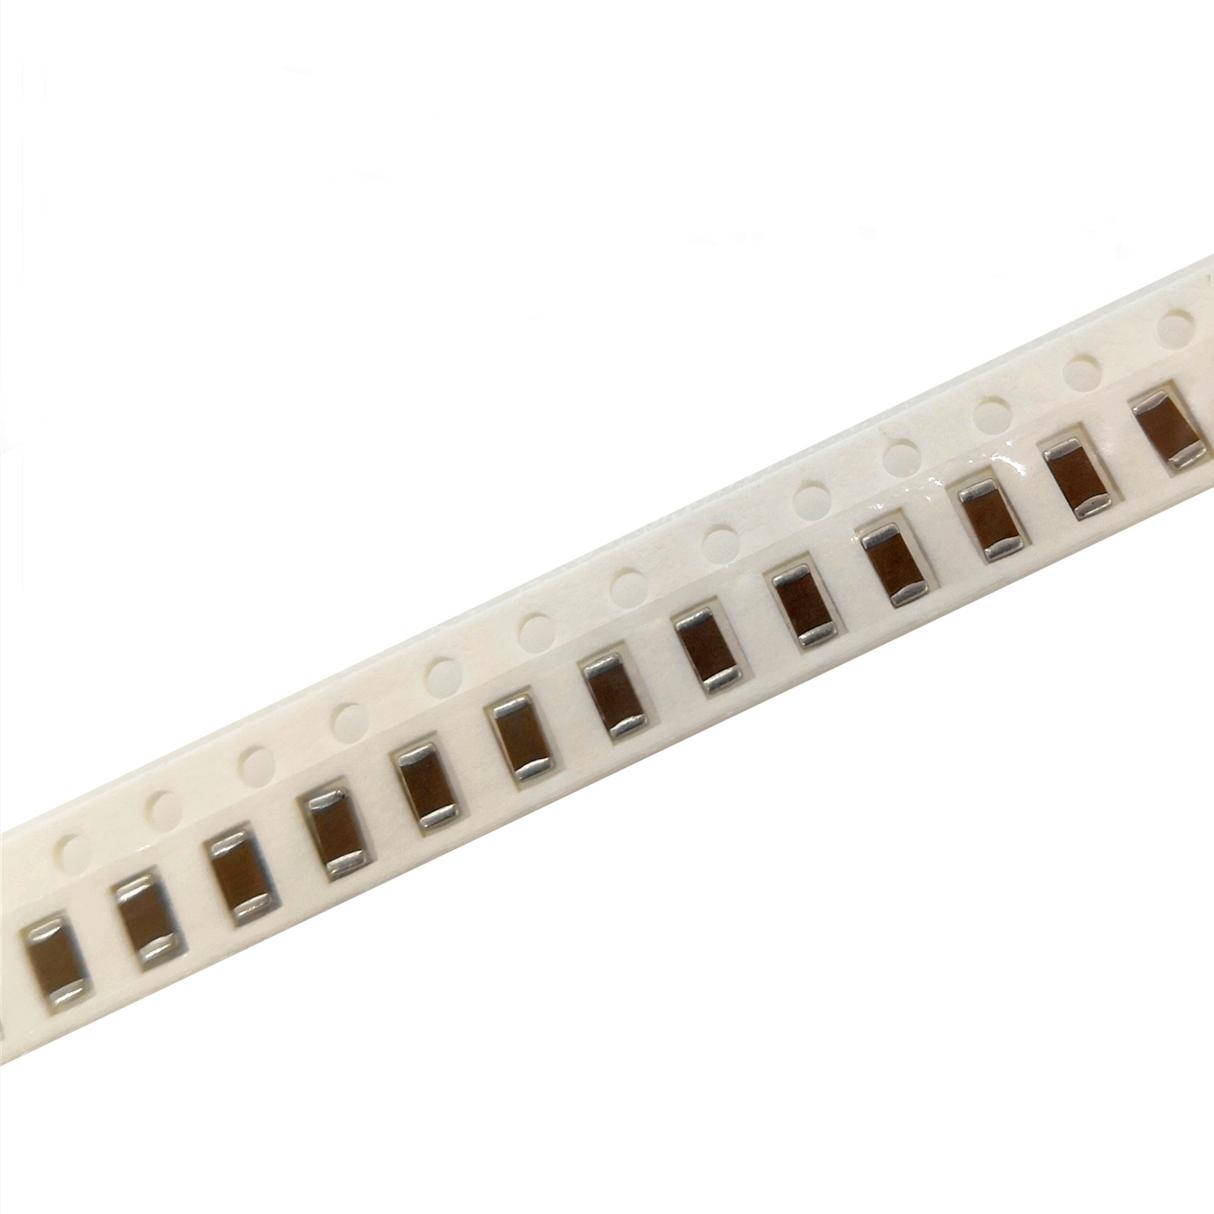  SMD 820pF 1206 C0G(NP0)